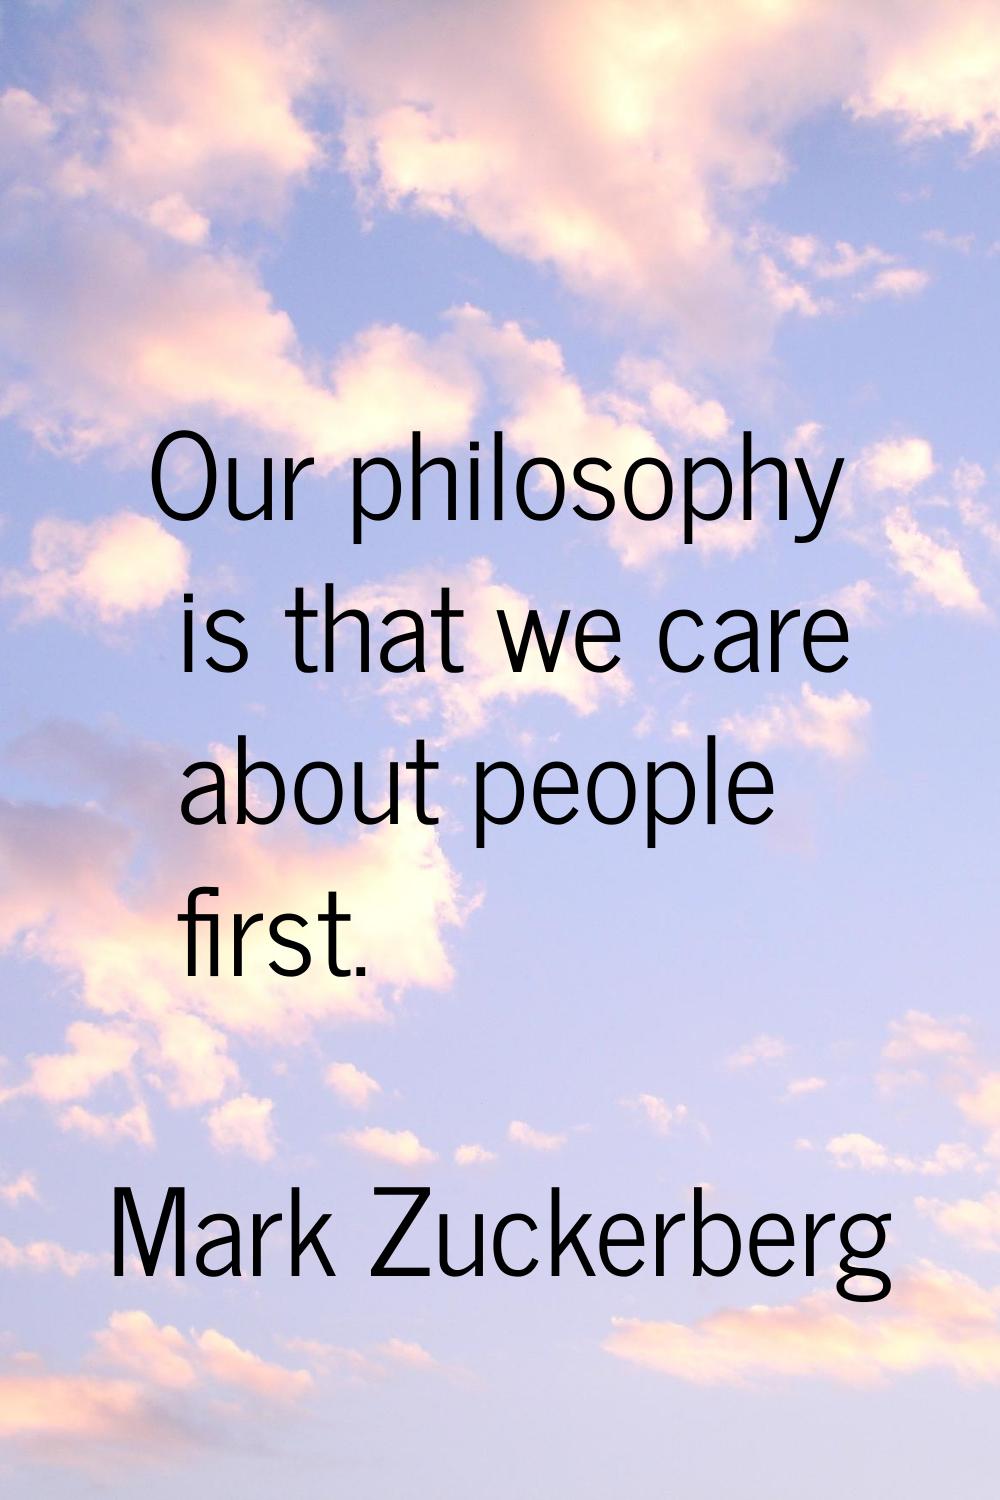 Our philosophy is that we care about people first.